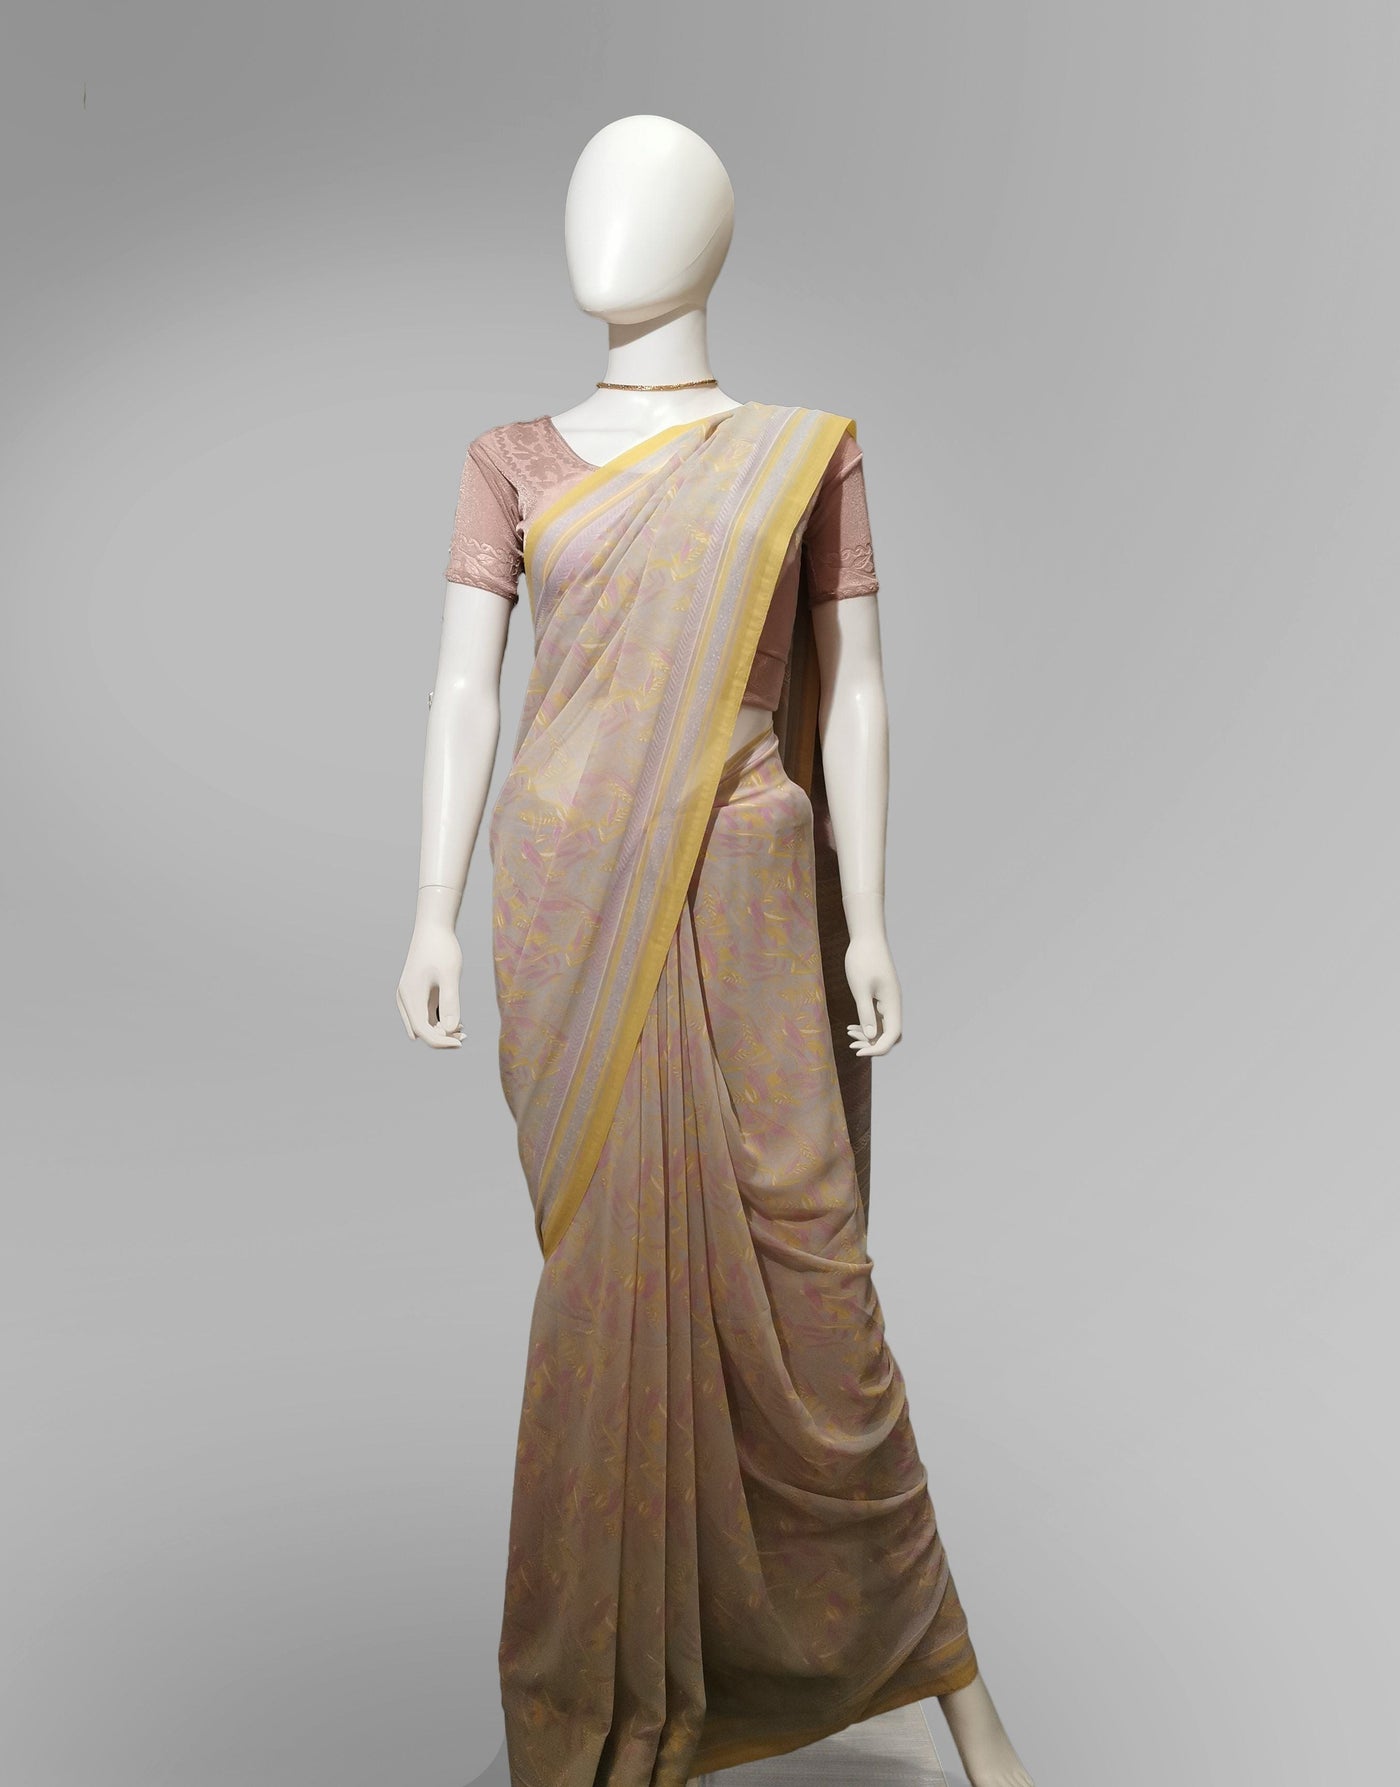 Saree in Light Peach Pink and Yellow with Traditional Print Indian Clothing in Denver, CO, Aurora, CO, Boulder, CO, Fort Collins, CO, Colorado Springs, CO, Parker, CO, Highlands Ranch, CO, Cherry Creek, CO, Centennial, CO, and Longmont, CO. NATIONWIDE SHIPPING USA- India Fashion X